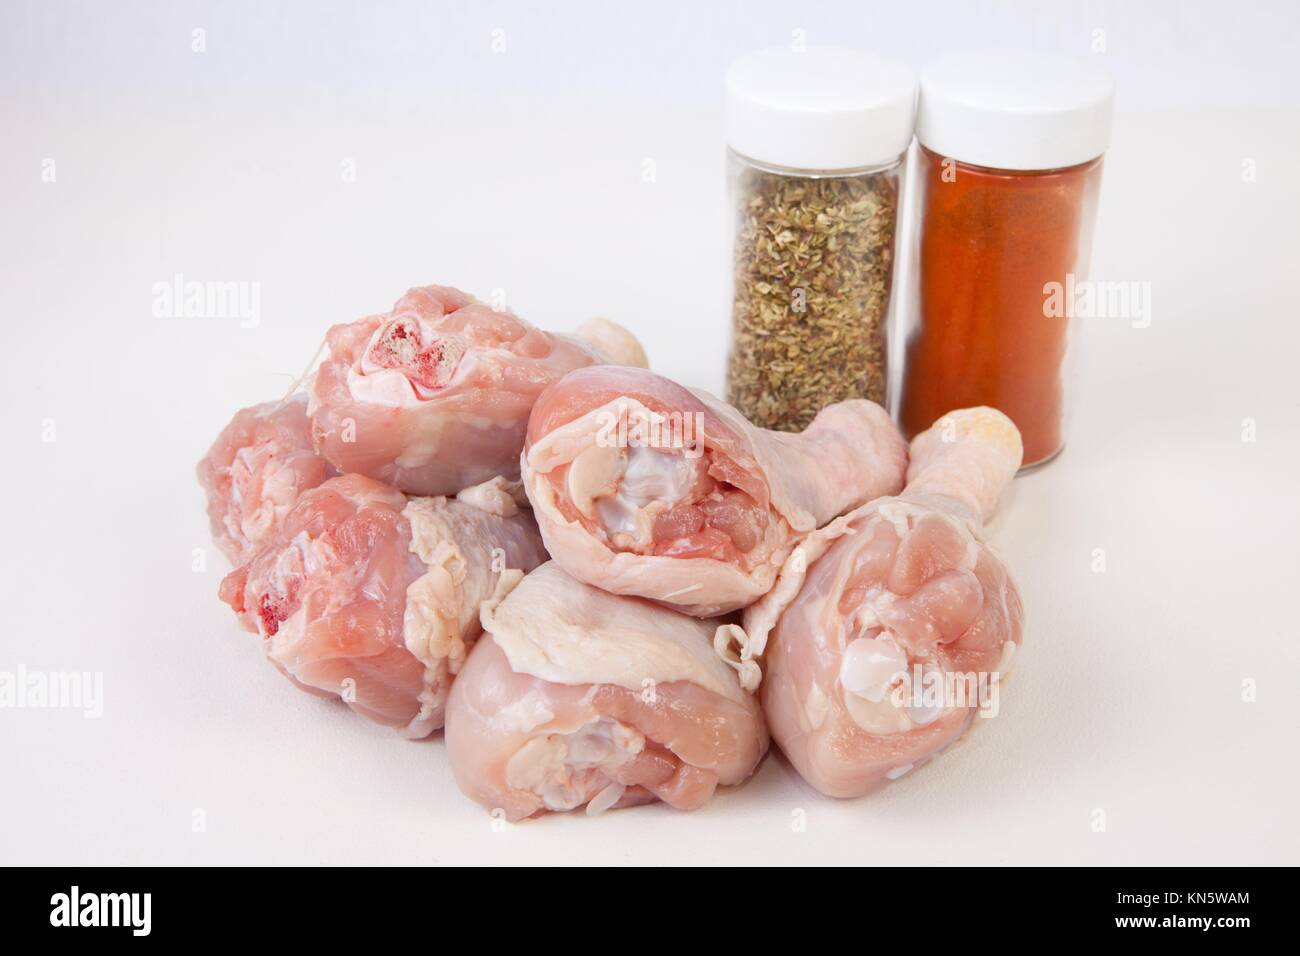 Chicken thighs or legs with spice bottles. Isolated over white background. Stock Photo